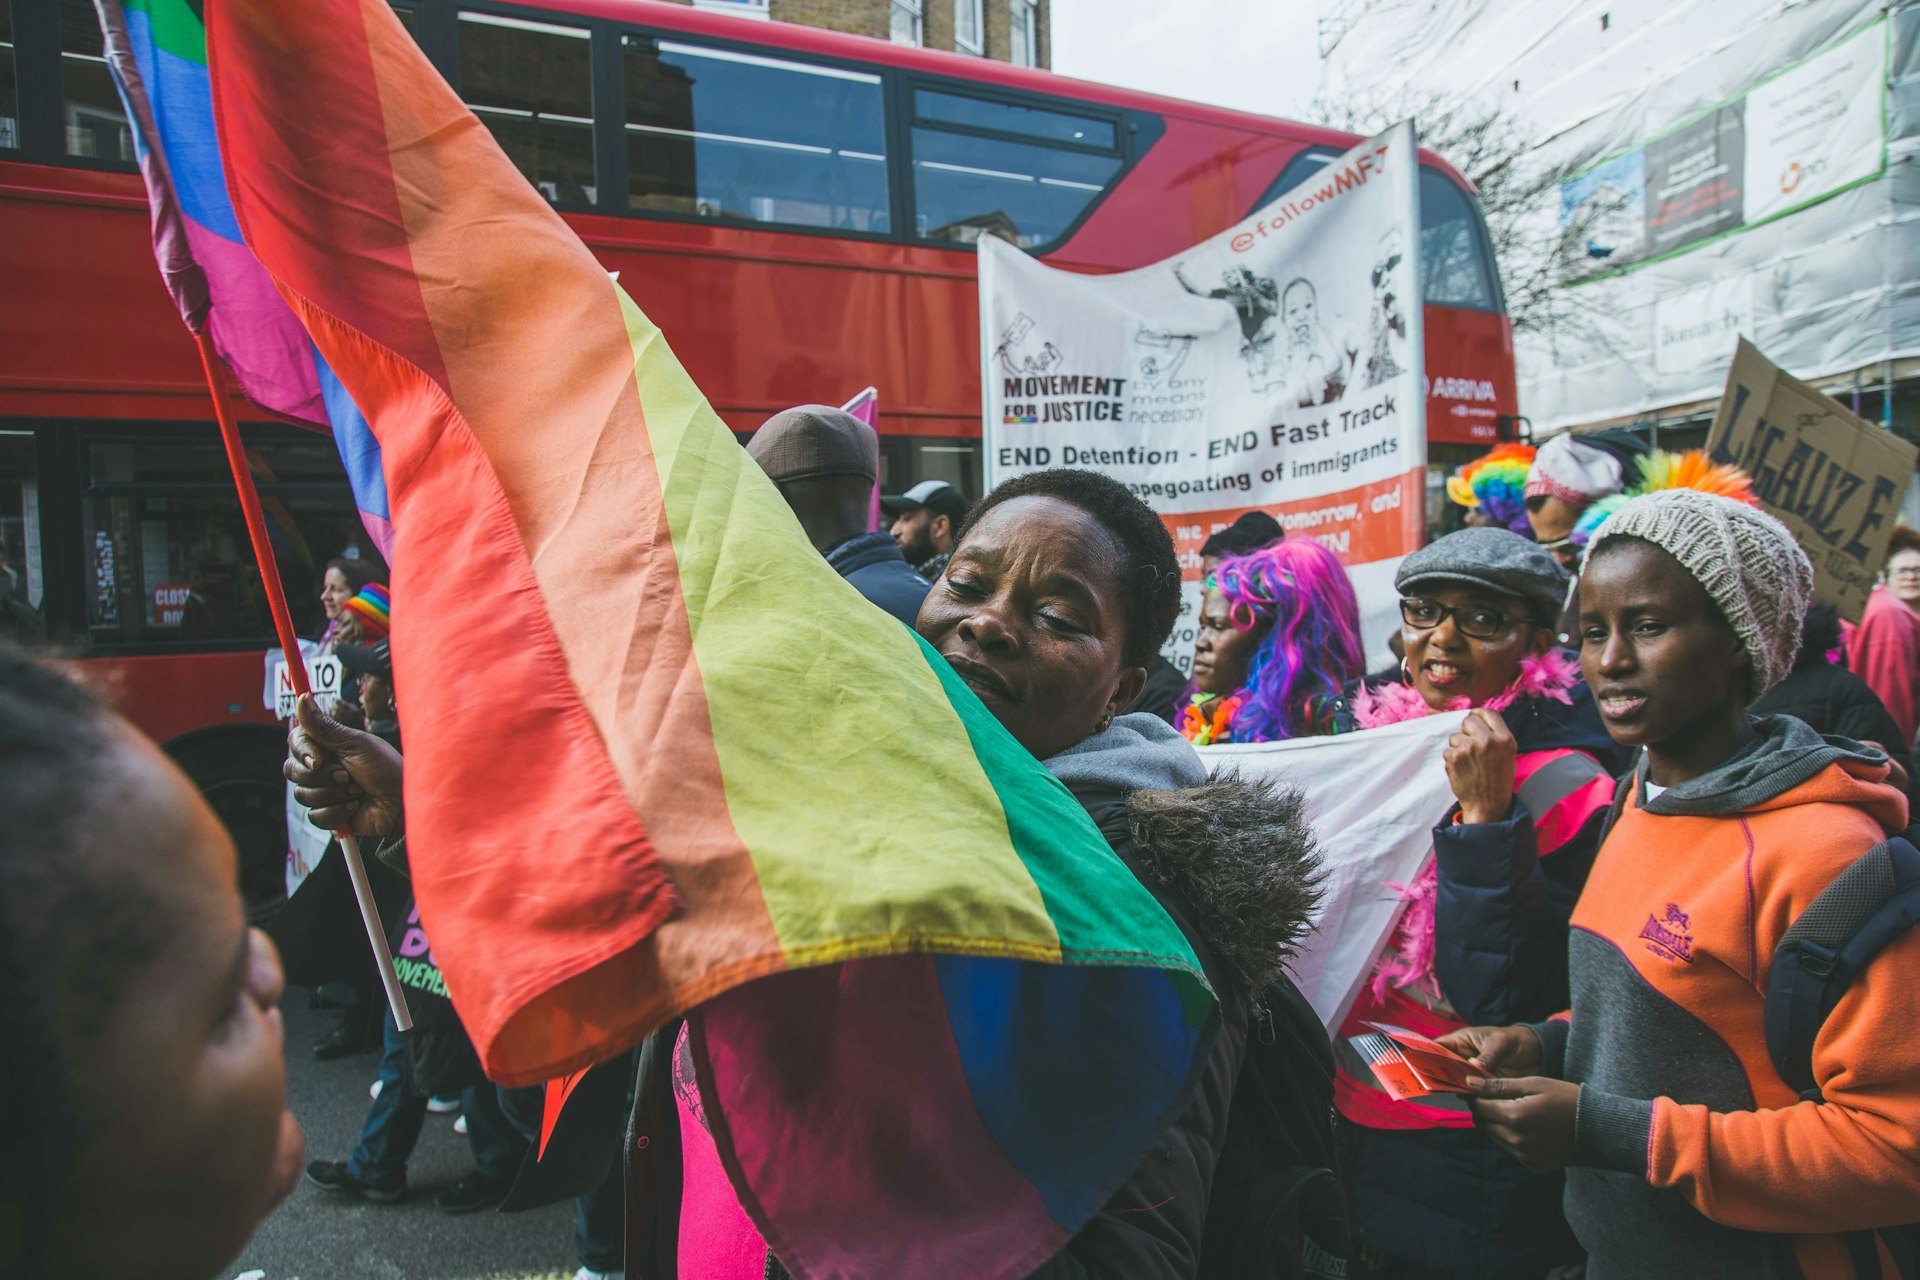 Peckham Pride: Resistance and celebration by London's migrants and queers